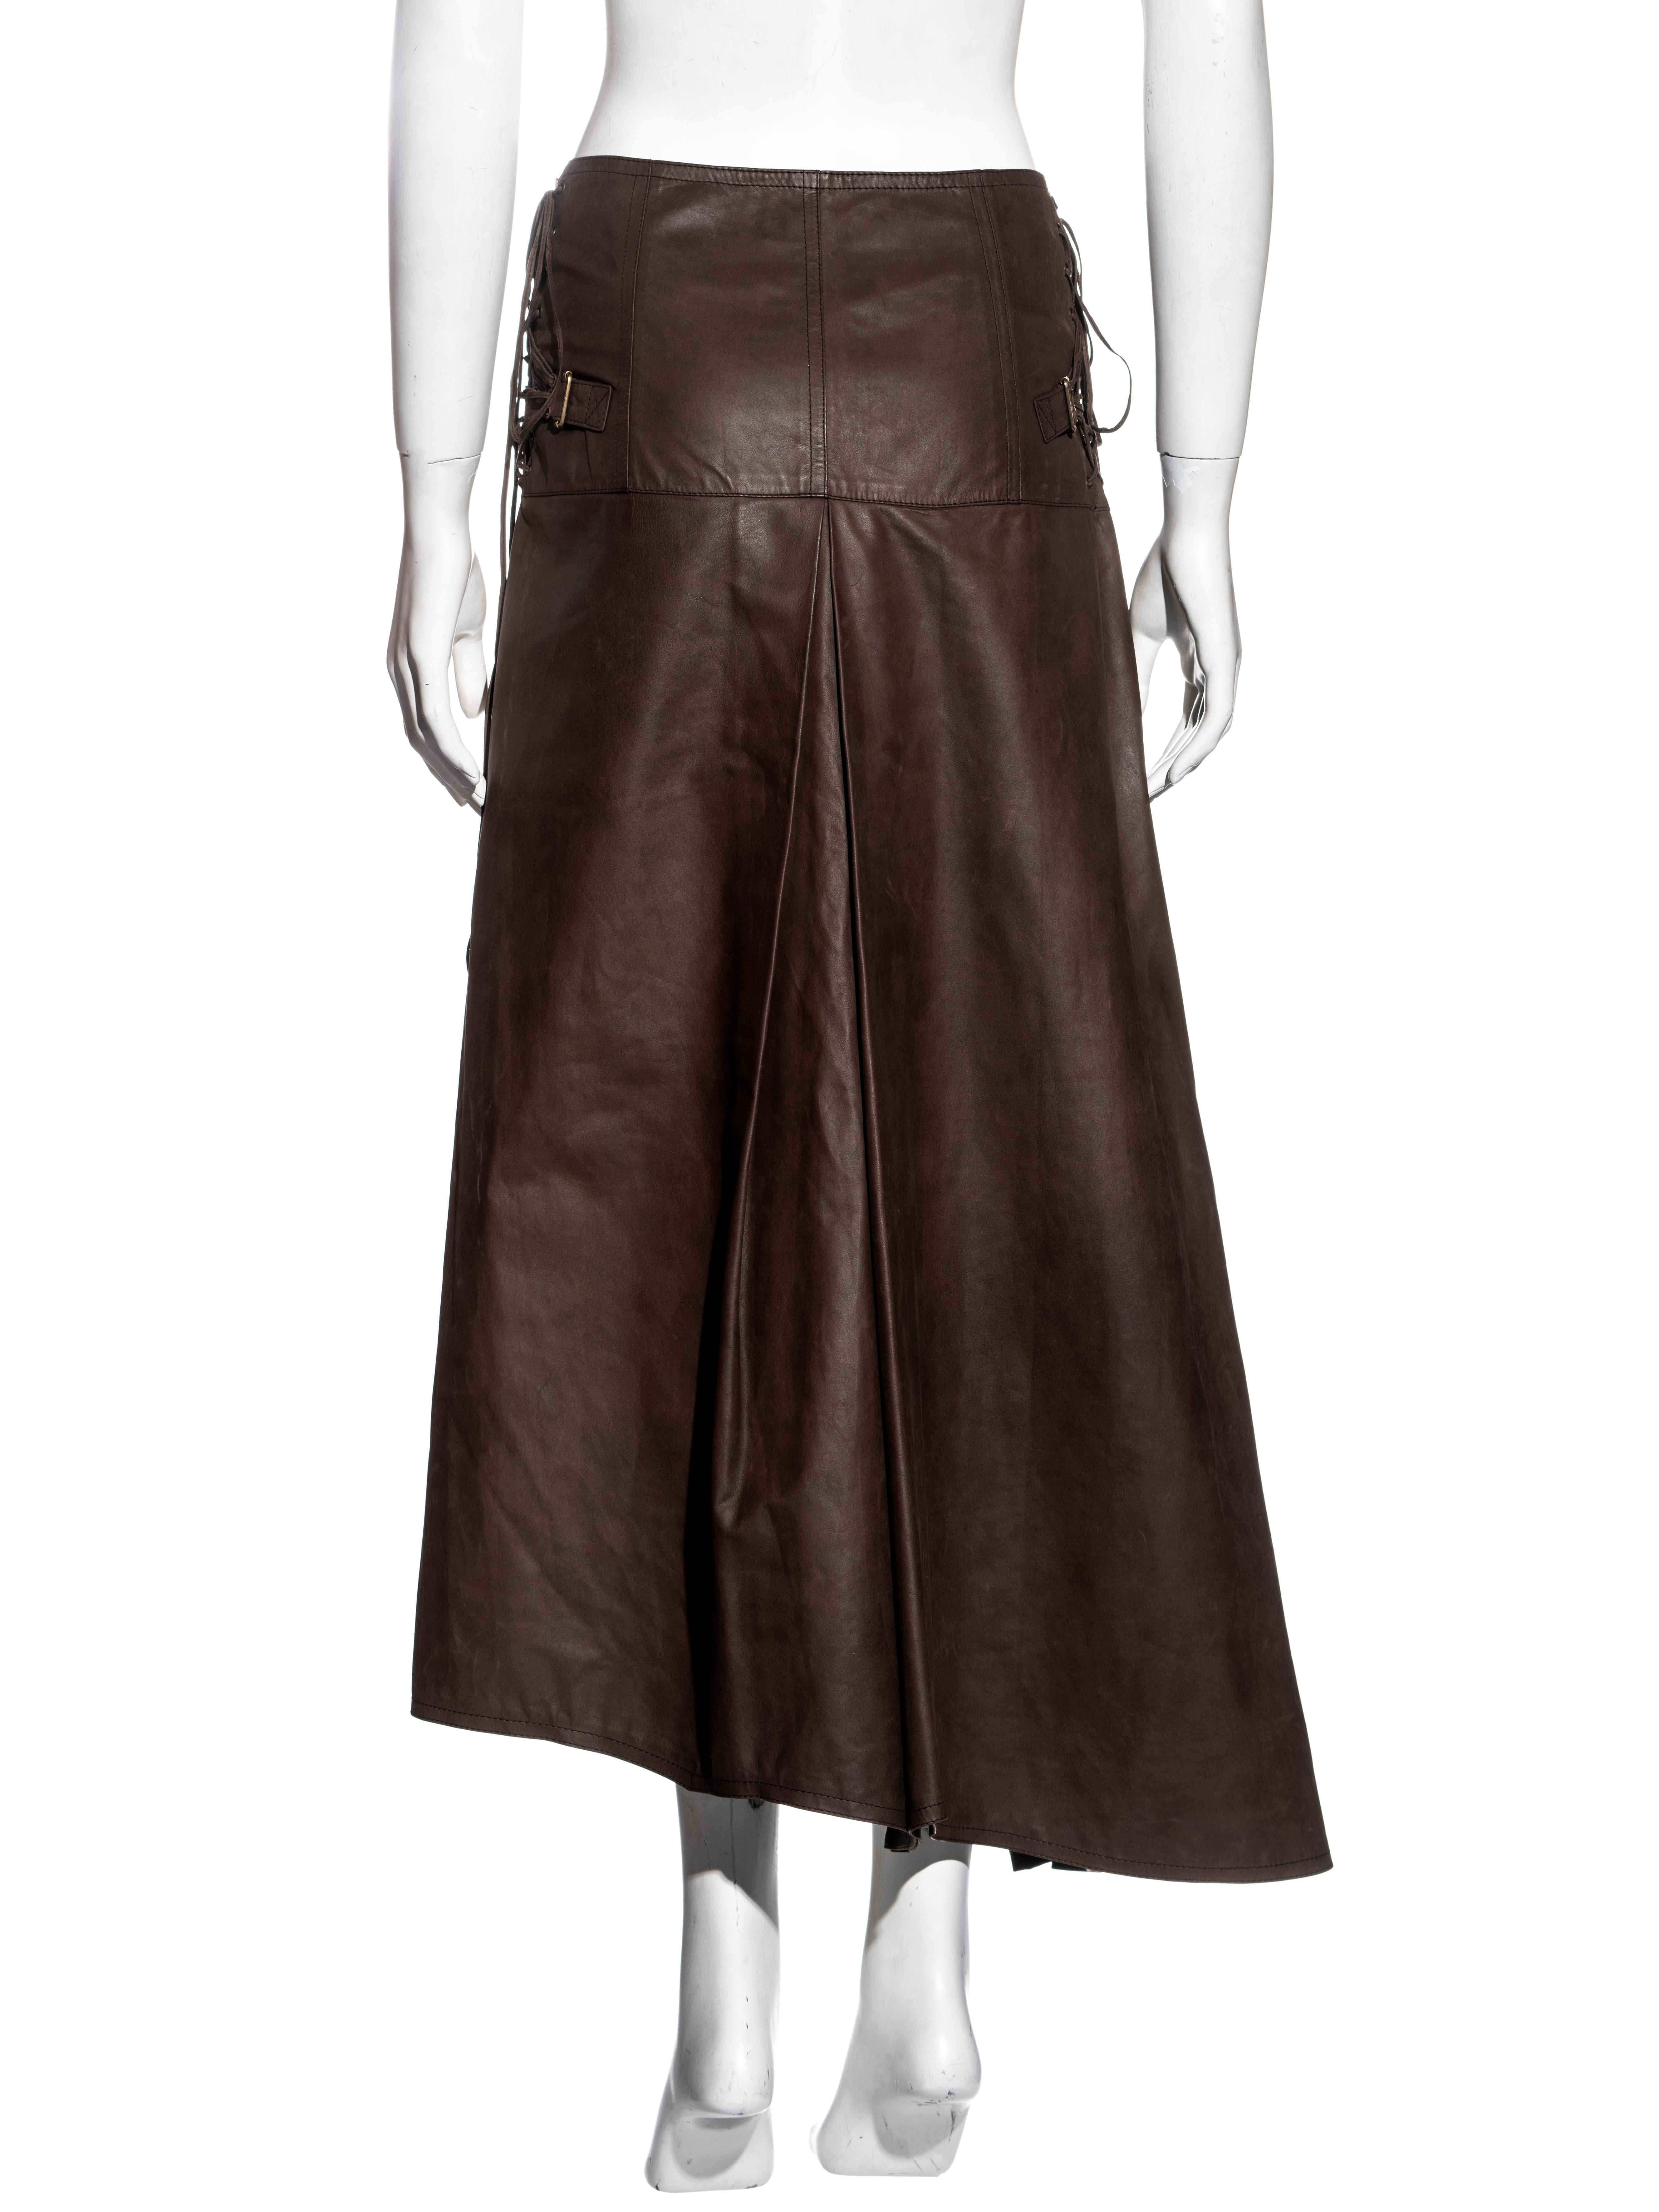 Christian Dior by John Galliano brown leather wrap skirt, ss 2001 4